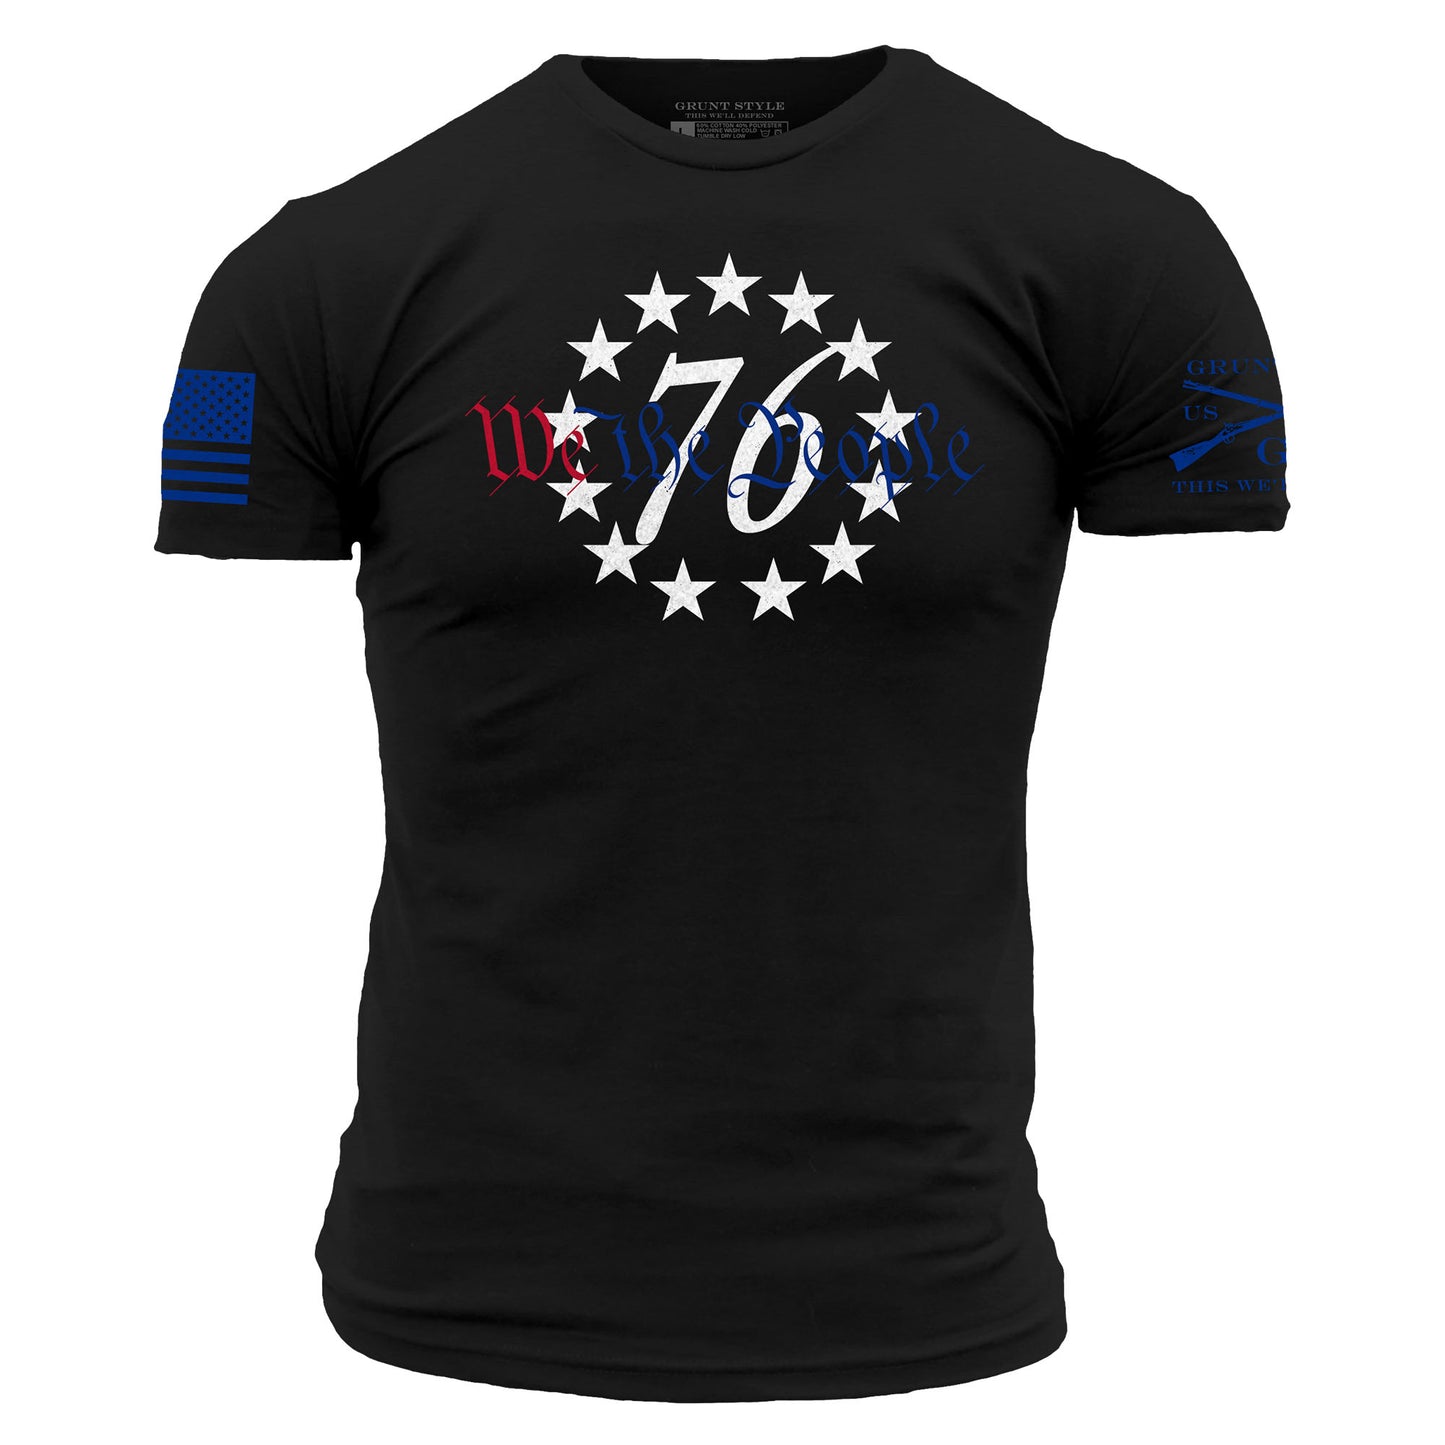 Patriotic Shirt for Men - We the People 